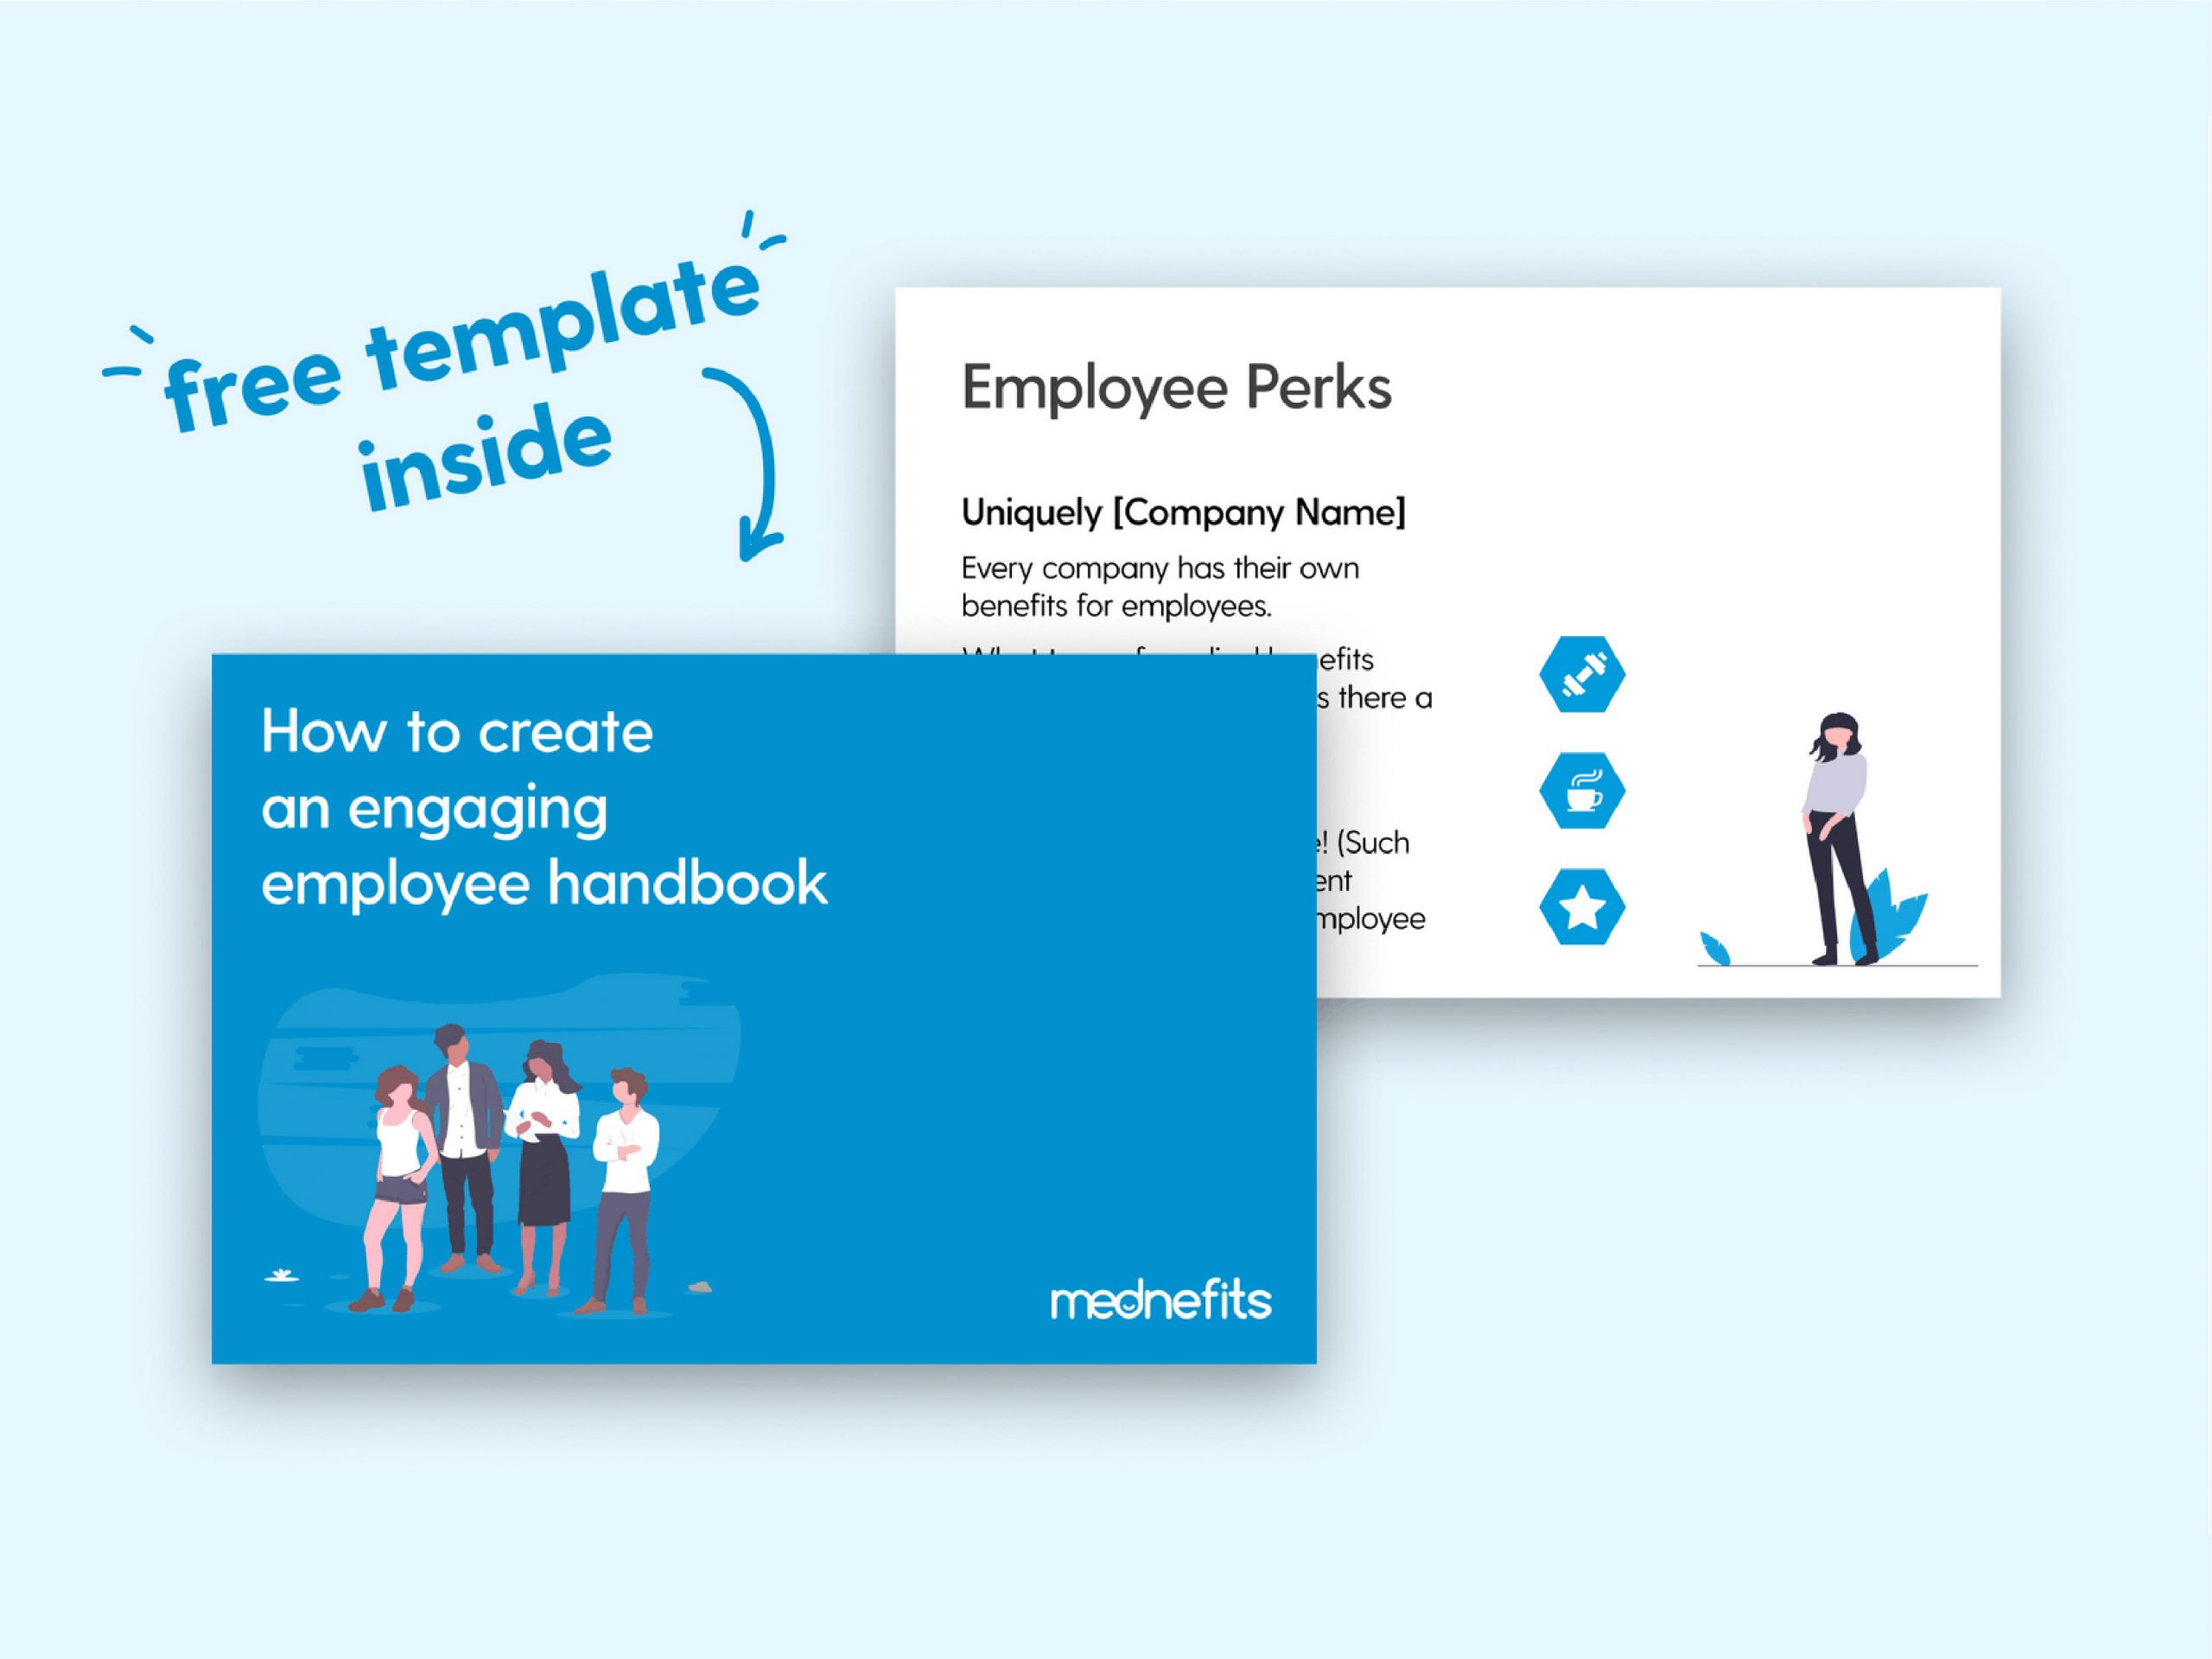 How to craft a complete employee handbook in Malaysia (free template for download)